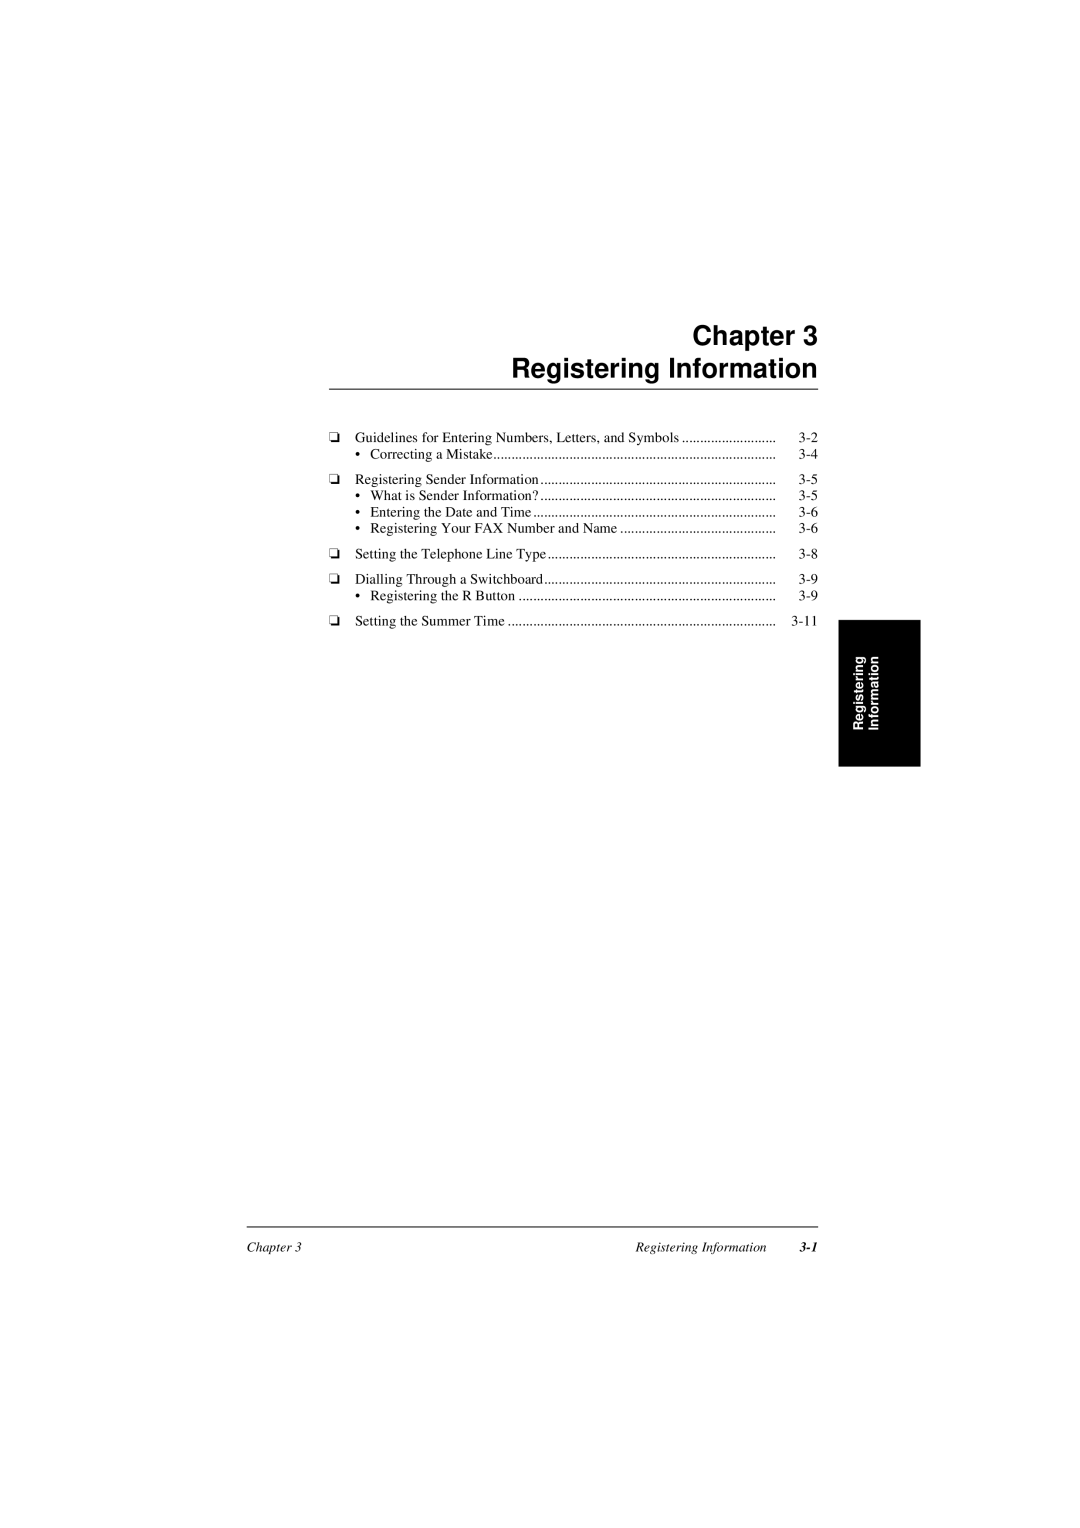 Canon L240, L290 manual Chapter Registering Information 